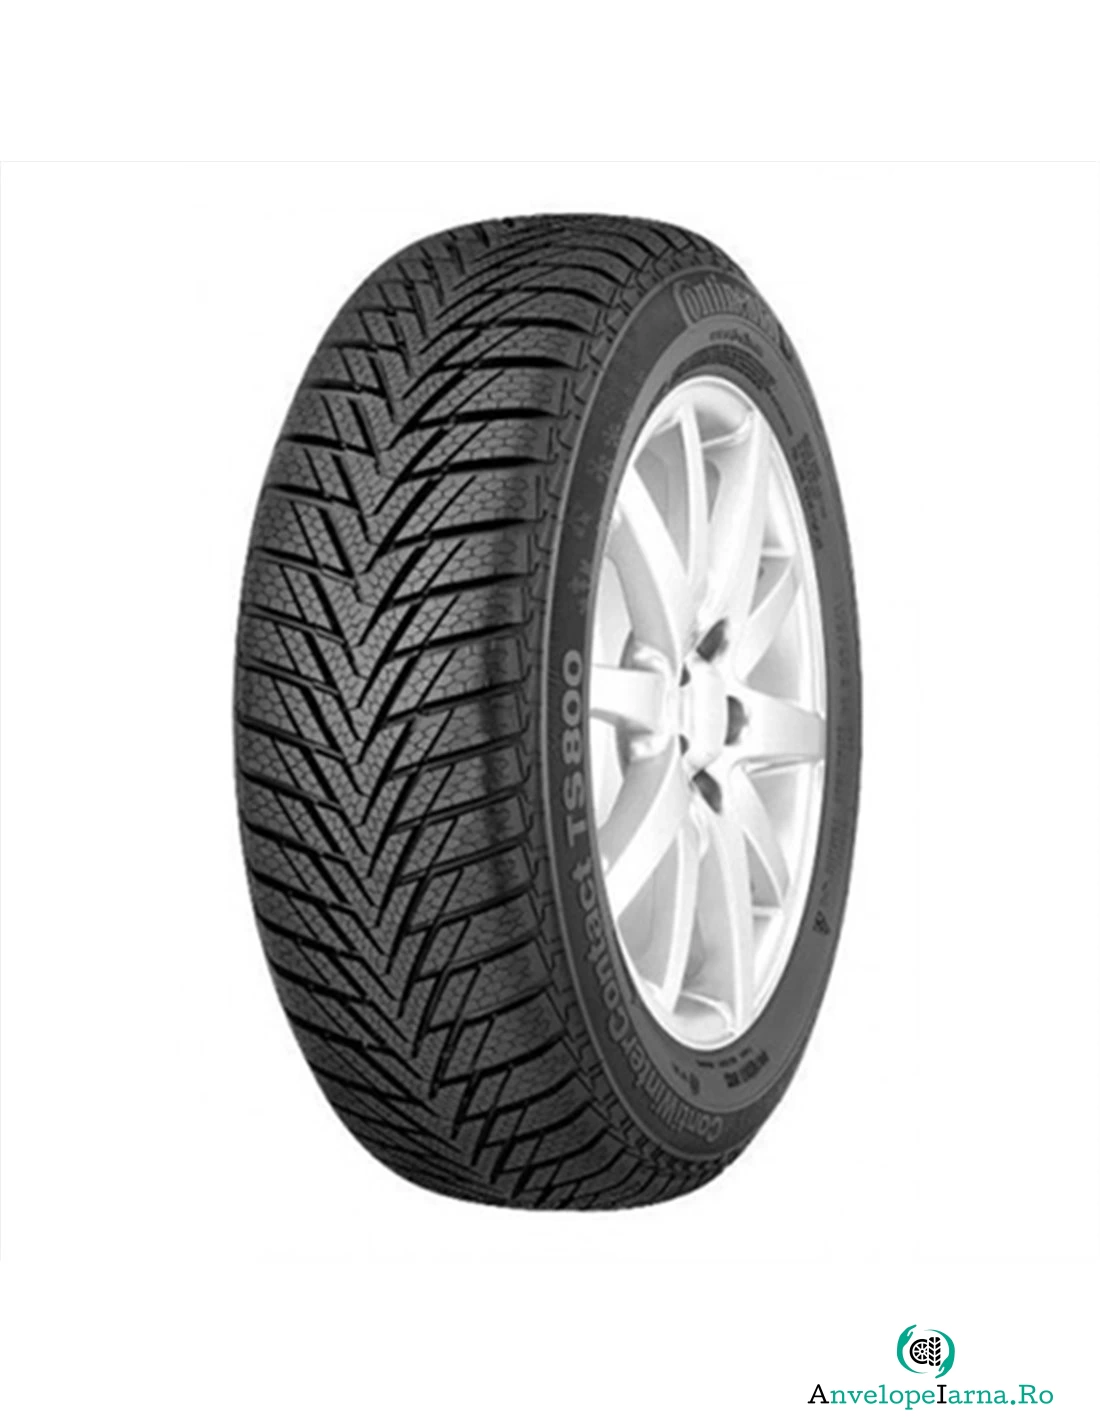 CONTINENTAL CONTIWINTERCONTACT TS800 175/65 R13 80T